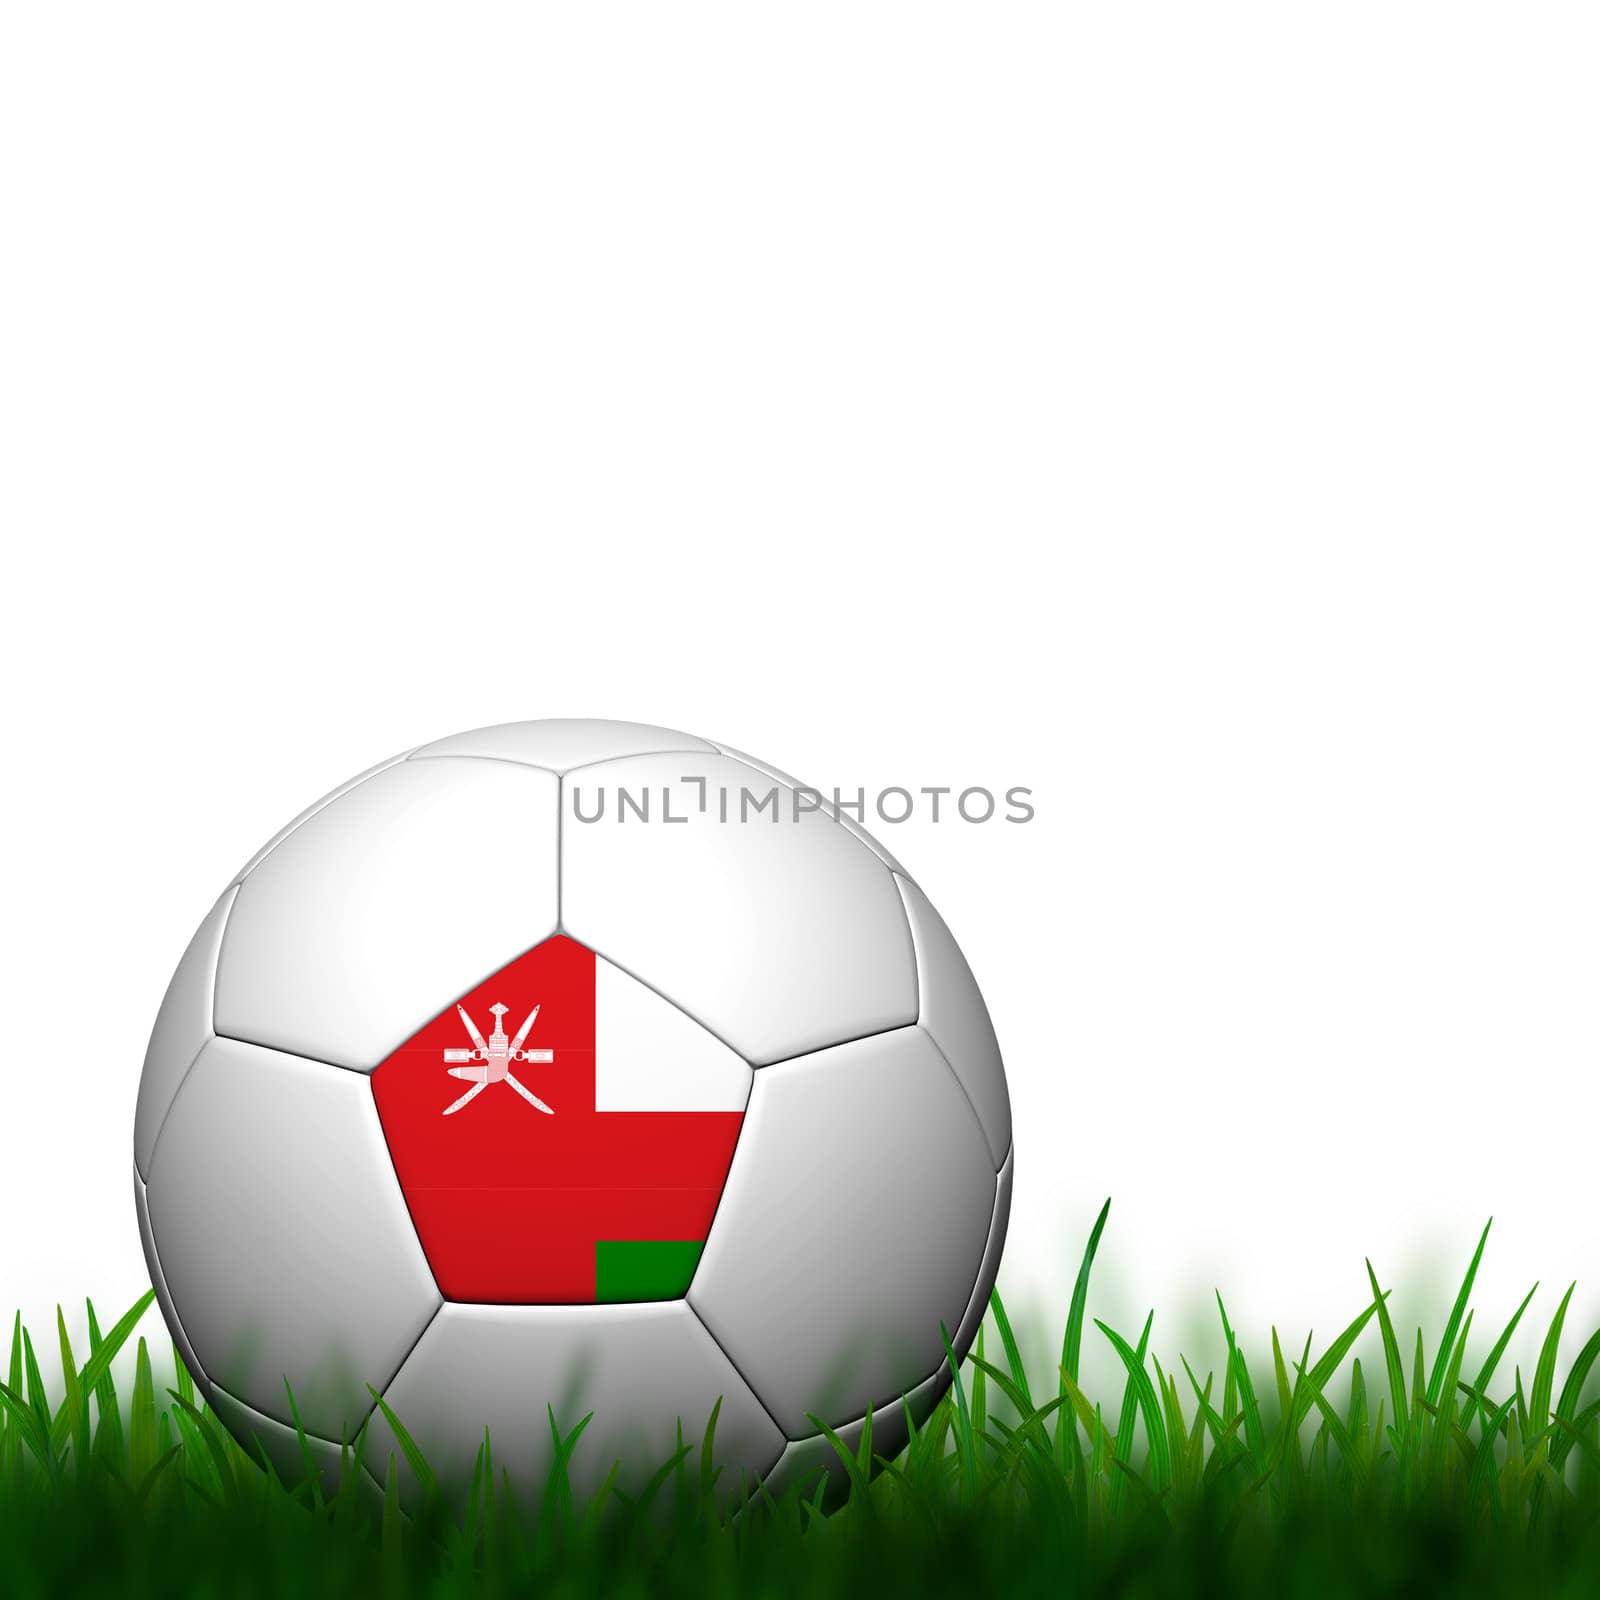 3D Football Oman Flag Patter in green grass on white background